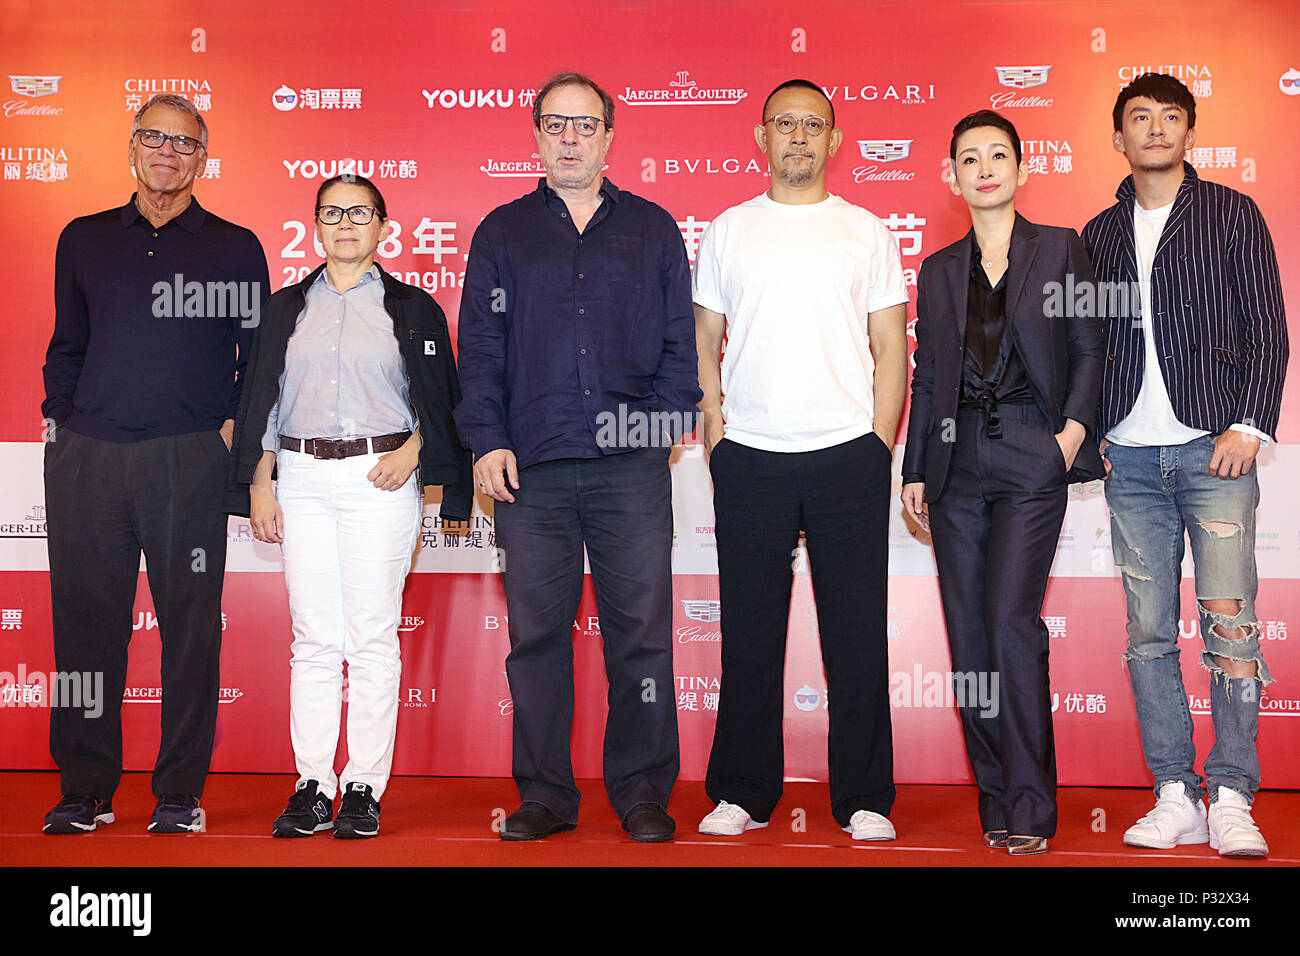 Shanghai, China. 17th June, 2018. Jury for the 21st SIFF Golden Goblet Awards Jiang Wen (3rd R), Semih Kaplanoglu (3rd L), Chang Chen (1st R), David Permut (1st L), Qin Hailu (2nd R), and Ildiko Enyedi (2nd L) attend a press conference during the Shanghai International Film Festival (SIFF) in Shanghai, east China, June 17, 2018. Credit: Zhu Liangcheng/Xinhua/Alamy Live News Stock Photo